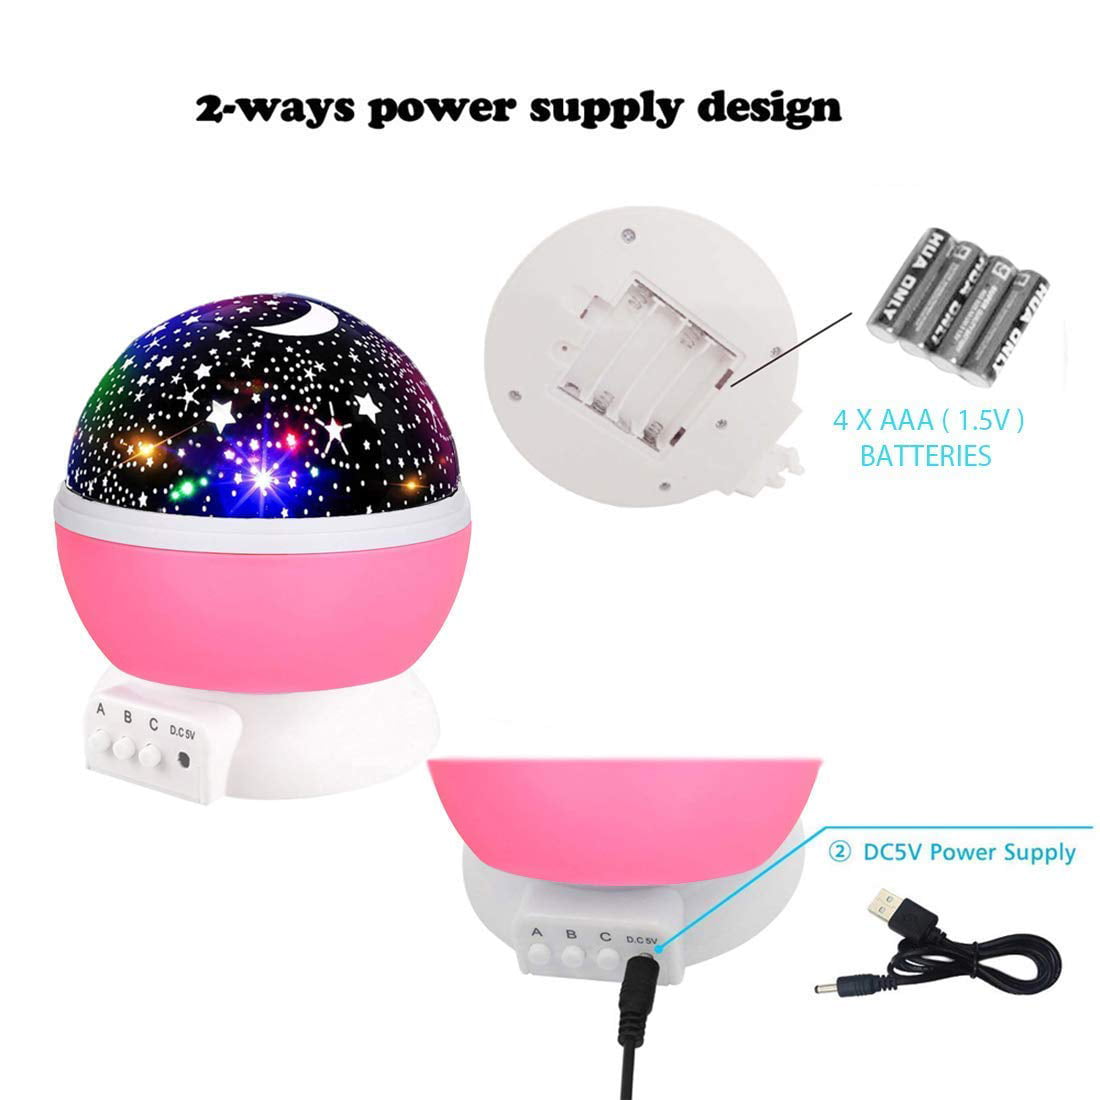 Toys for 3-12 Year Old Boys CYMY Star Projector Night Lighting for Kids Toys for 3-12 Year Old Girls Christmas Gifts for 3-12 Year Old Boys Girl Birthday Present Babies Bedroom Lights 